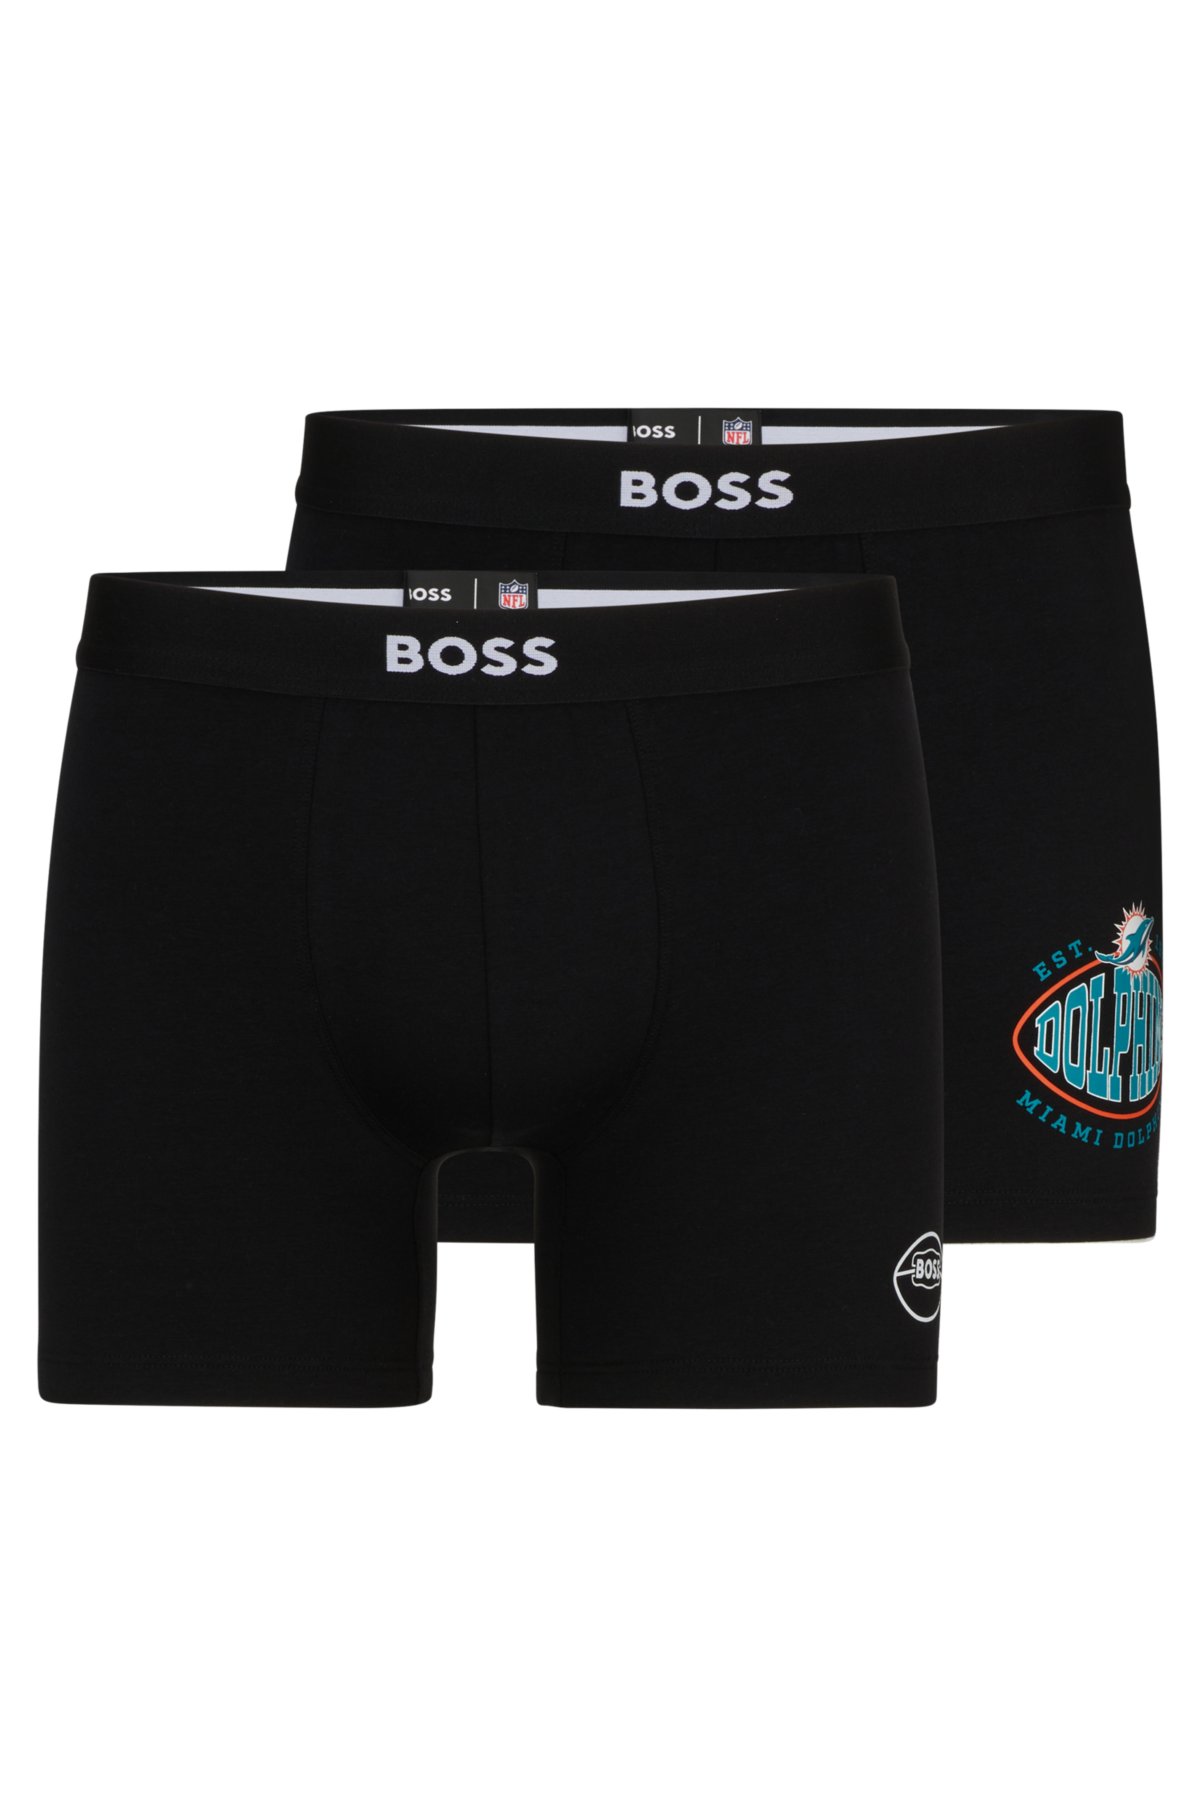 BOSS x NFL two-pack of boxer briefs with collaborative branding, Dolphins